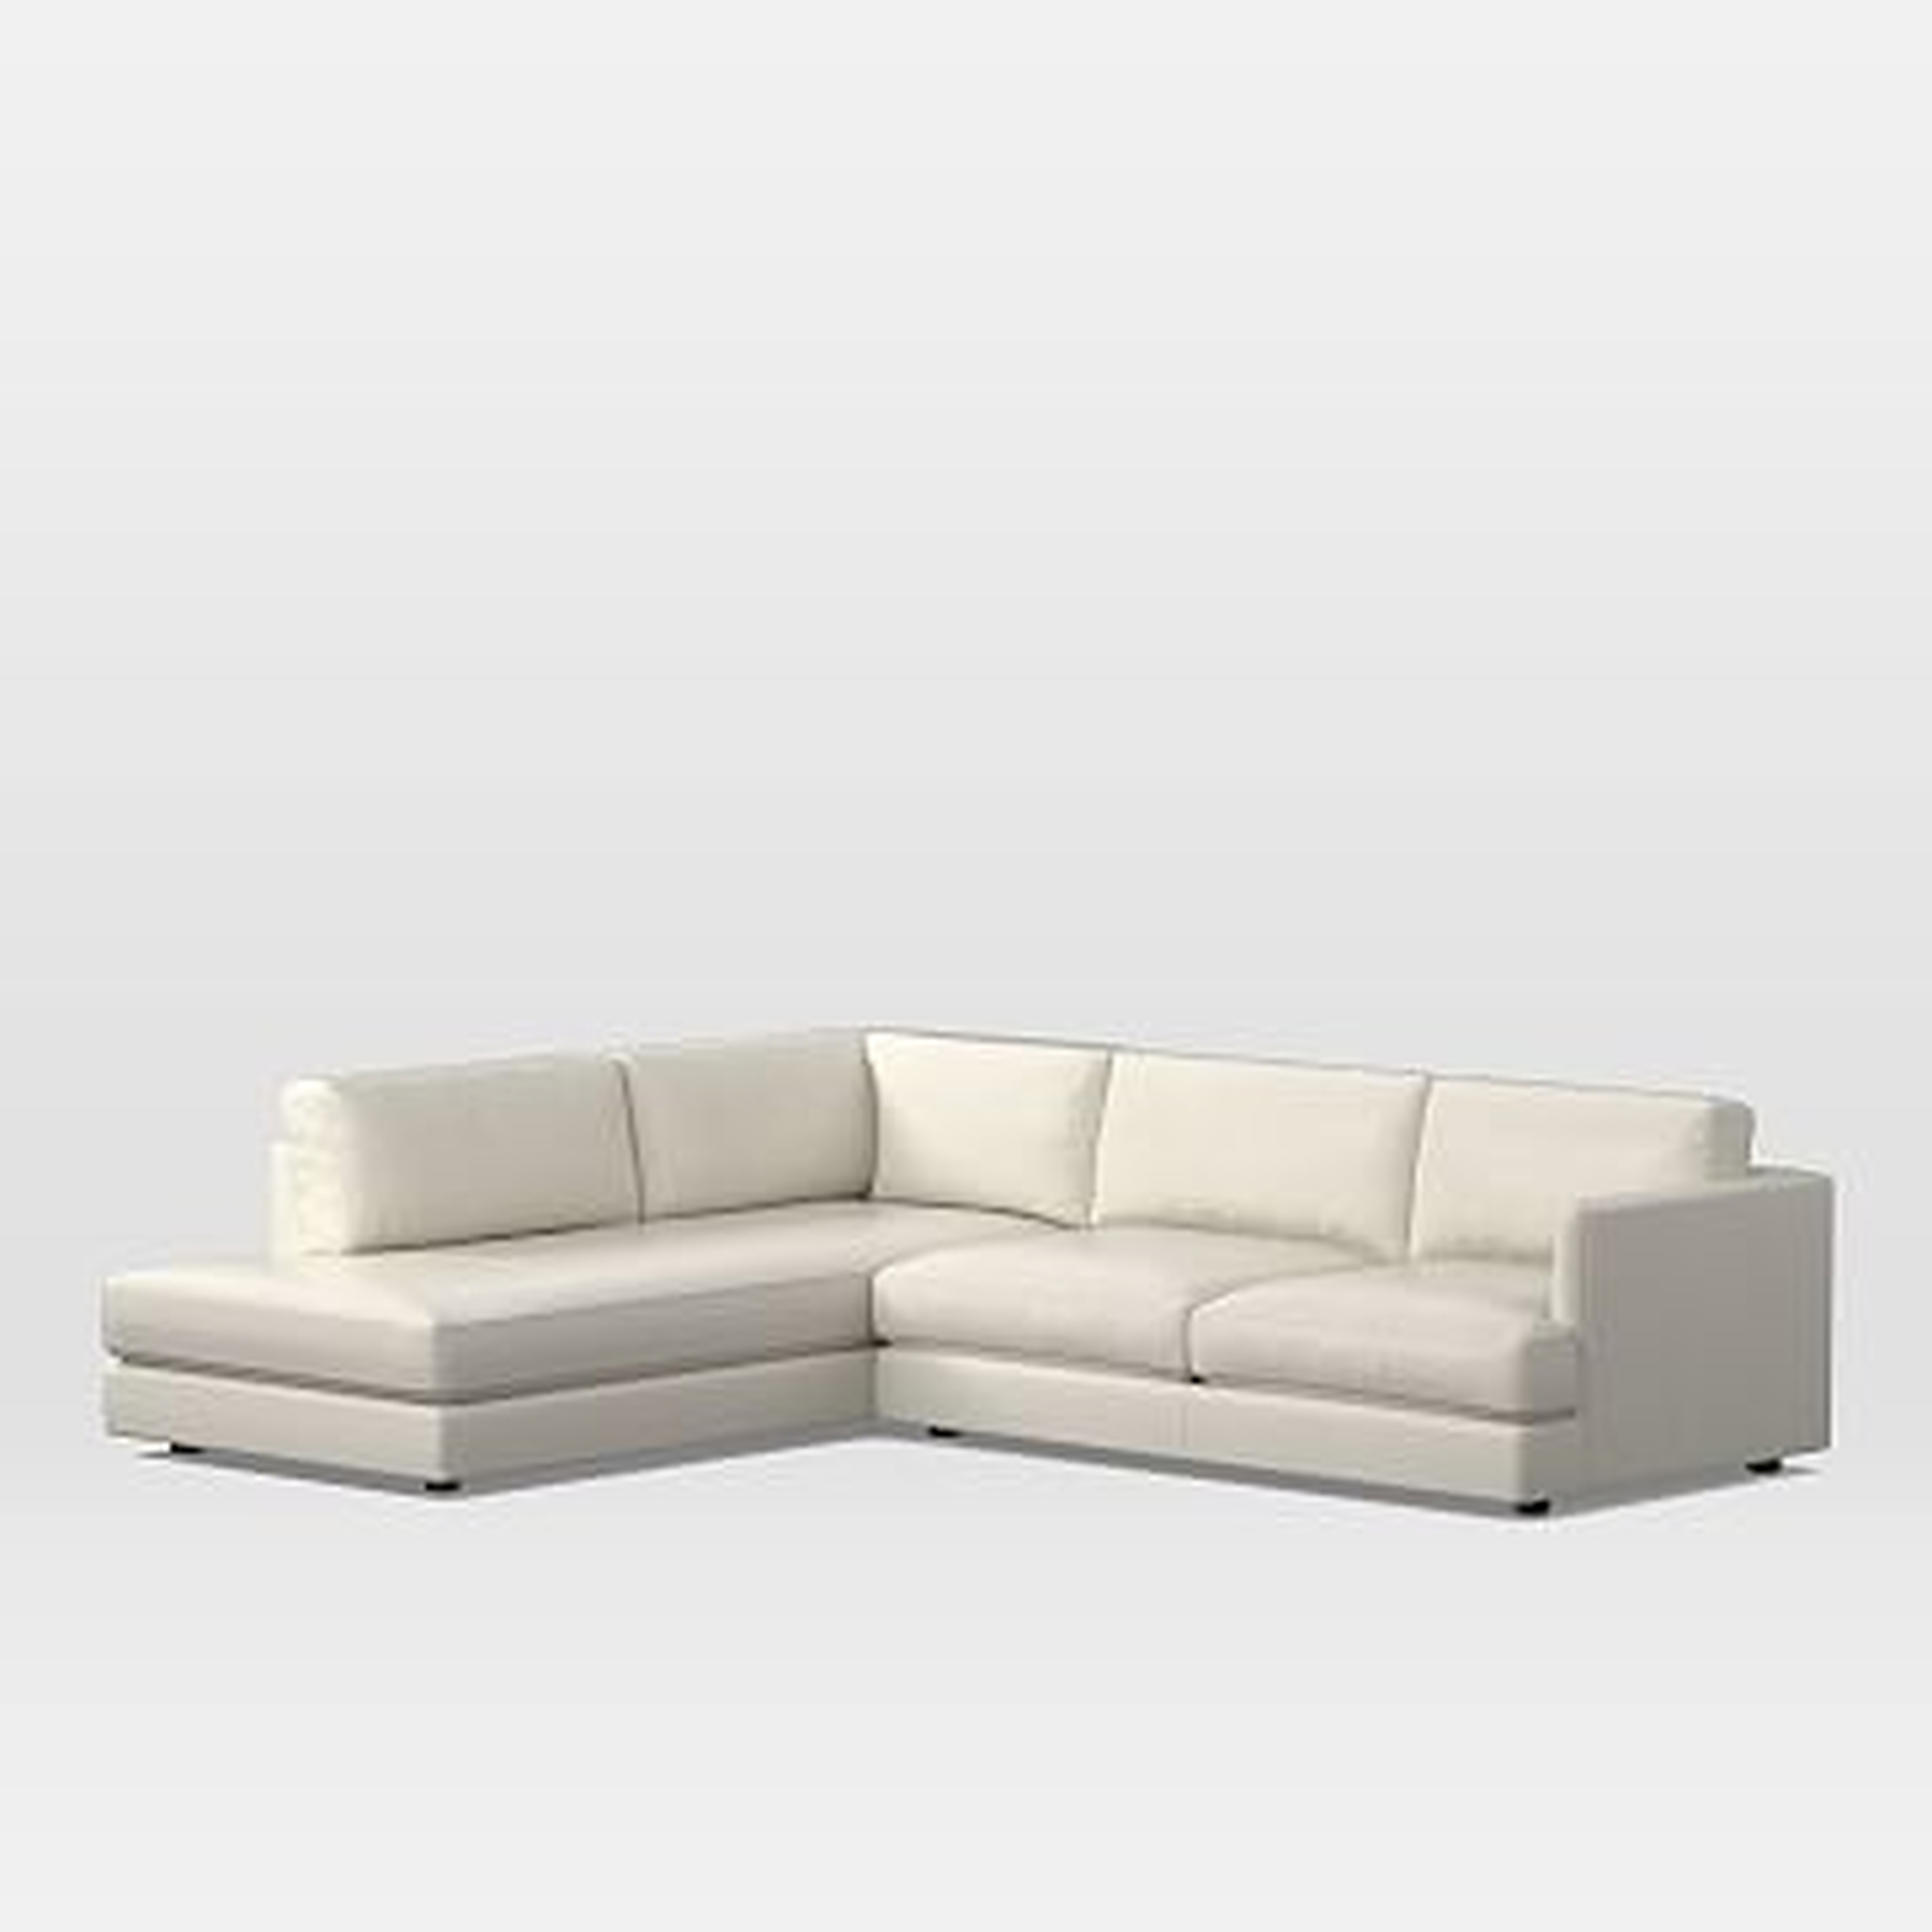 Haven Sectional Set 02: Right Arm Sofa, Left Arm Terminal Chaise, Poly, Sauvage Leather, Chalk - West Elm